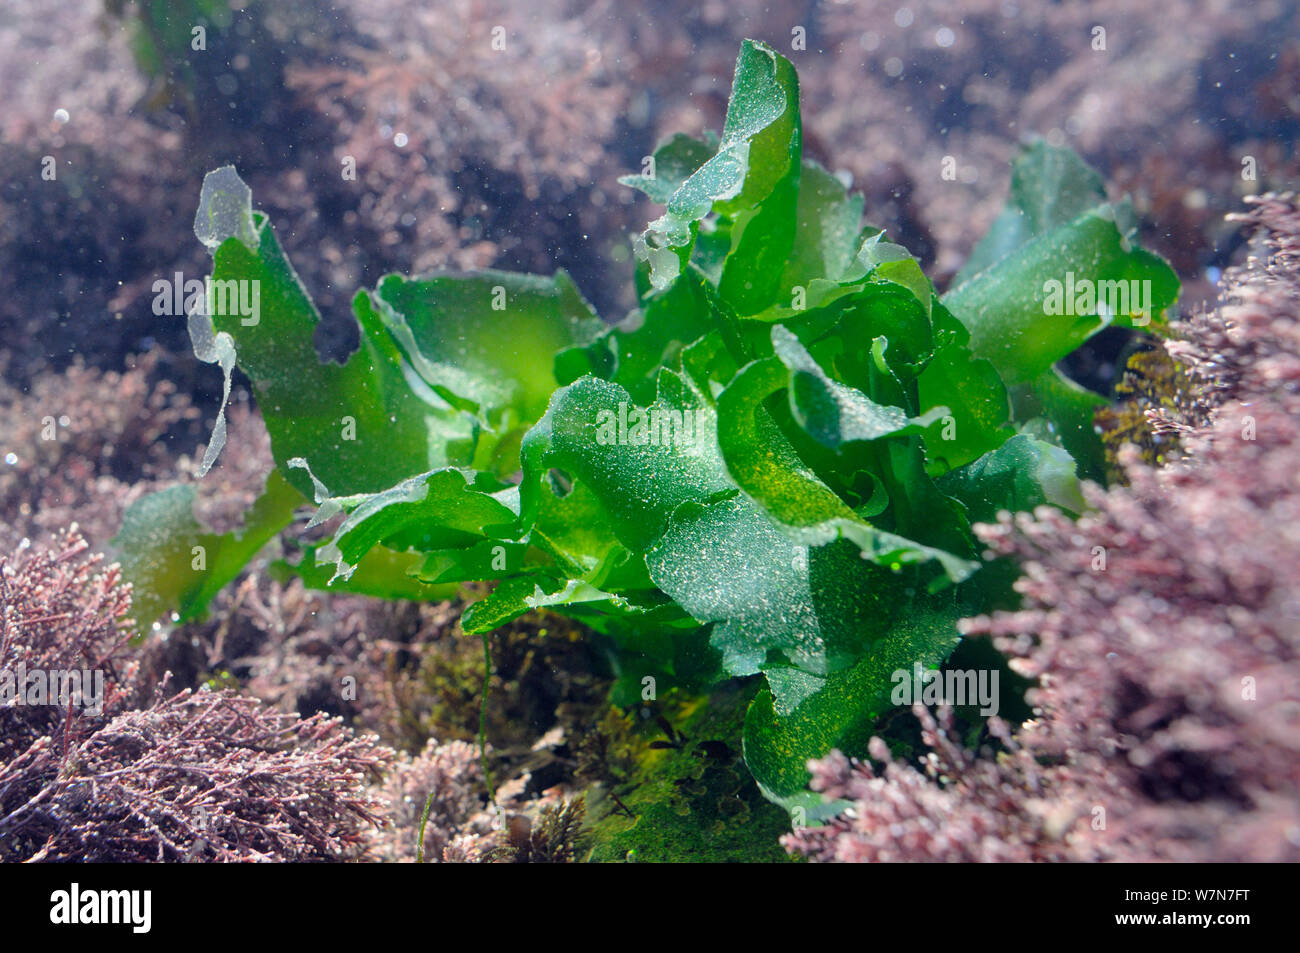 Sea lettuce / Green laver (Ulva lactuca) growing in a rockpool alongside Coralweed (Corallina officinalis). Rhossili, The Gower Peninsula, UK, July. Stock Photo